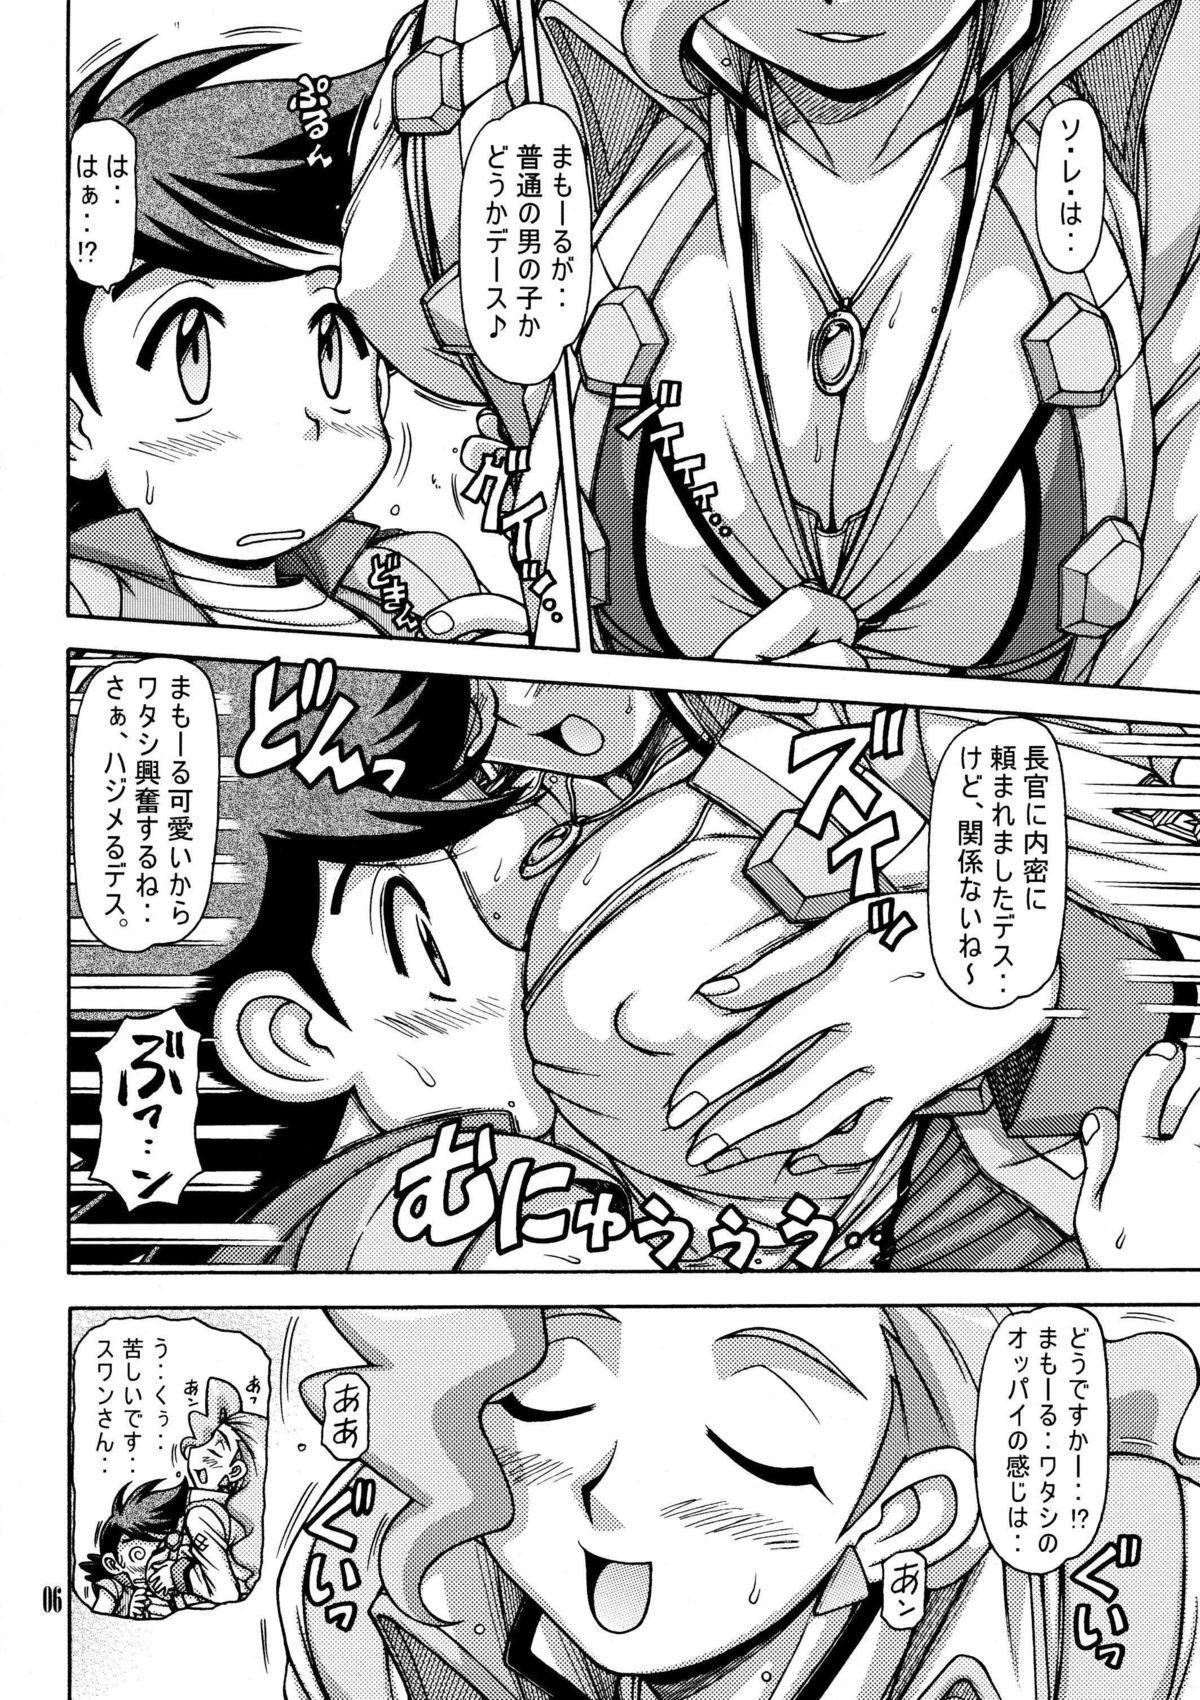 Famosa Red Muffler GGG - Gaogaigar Married - Page 5